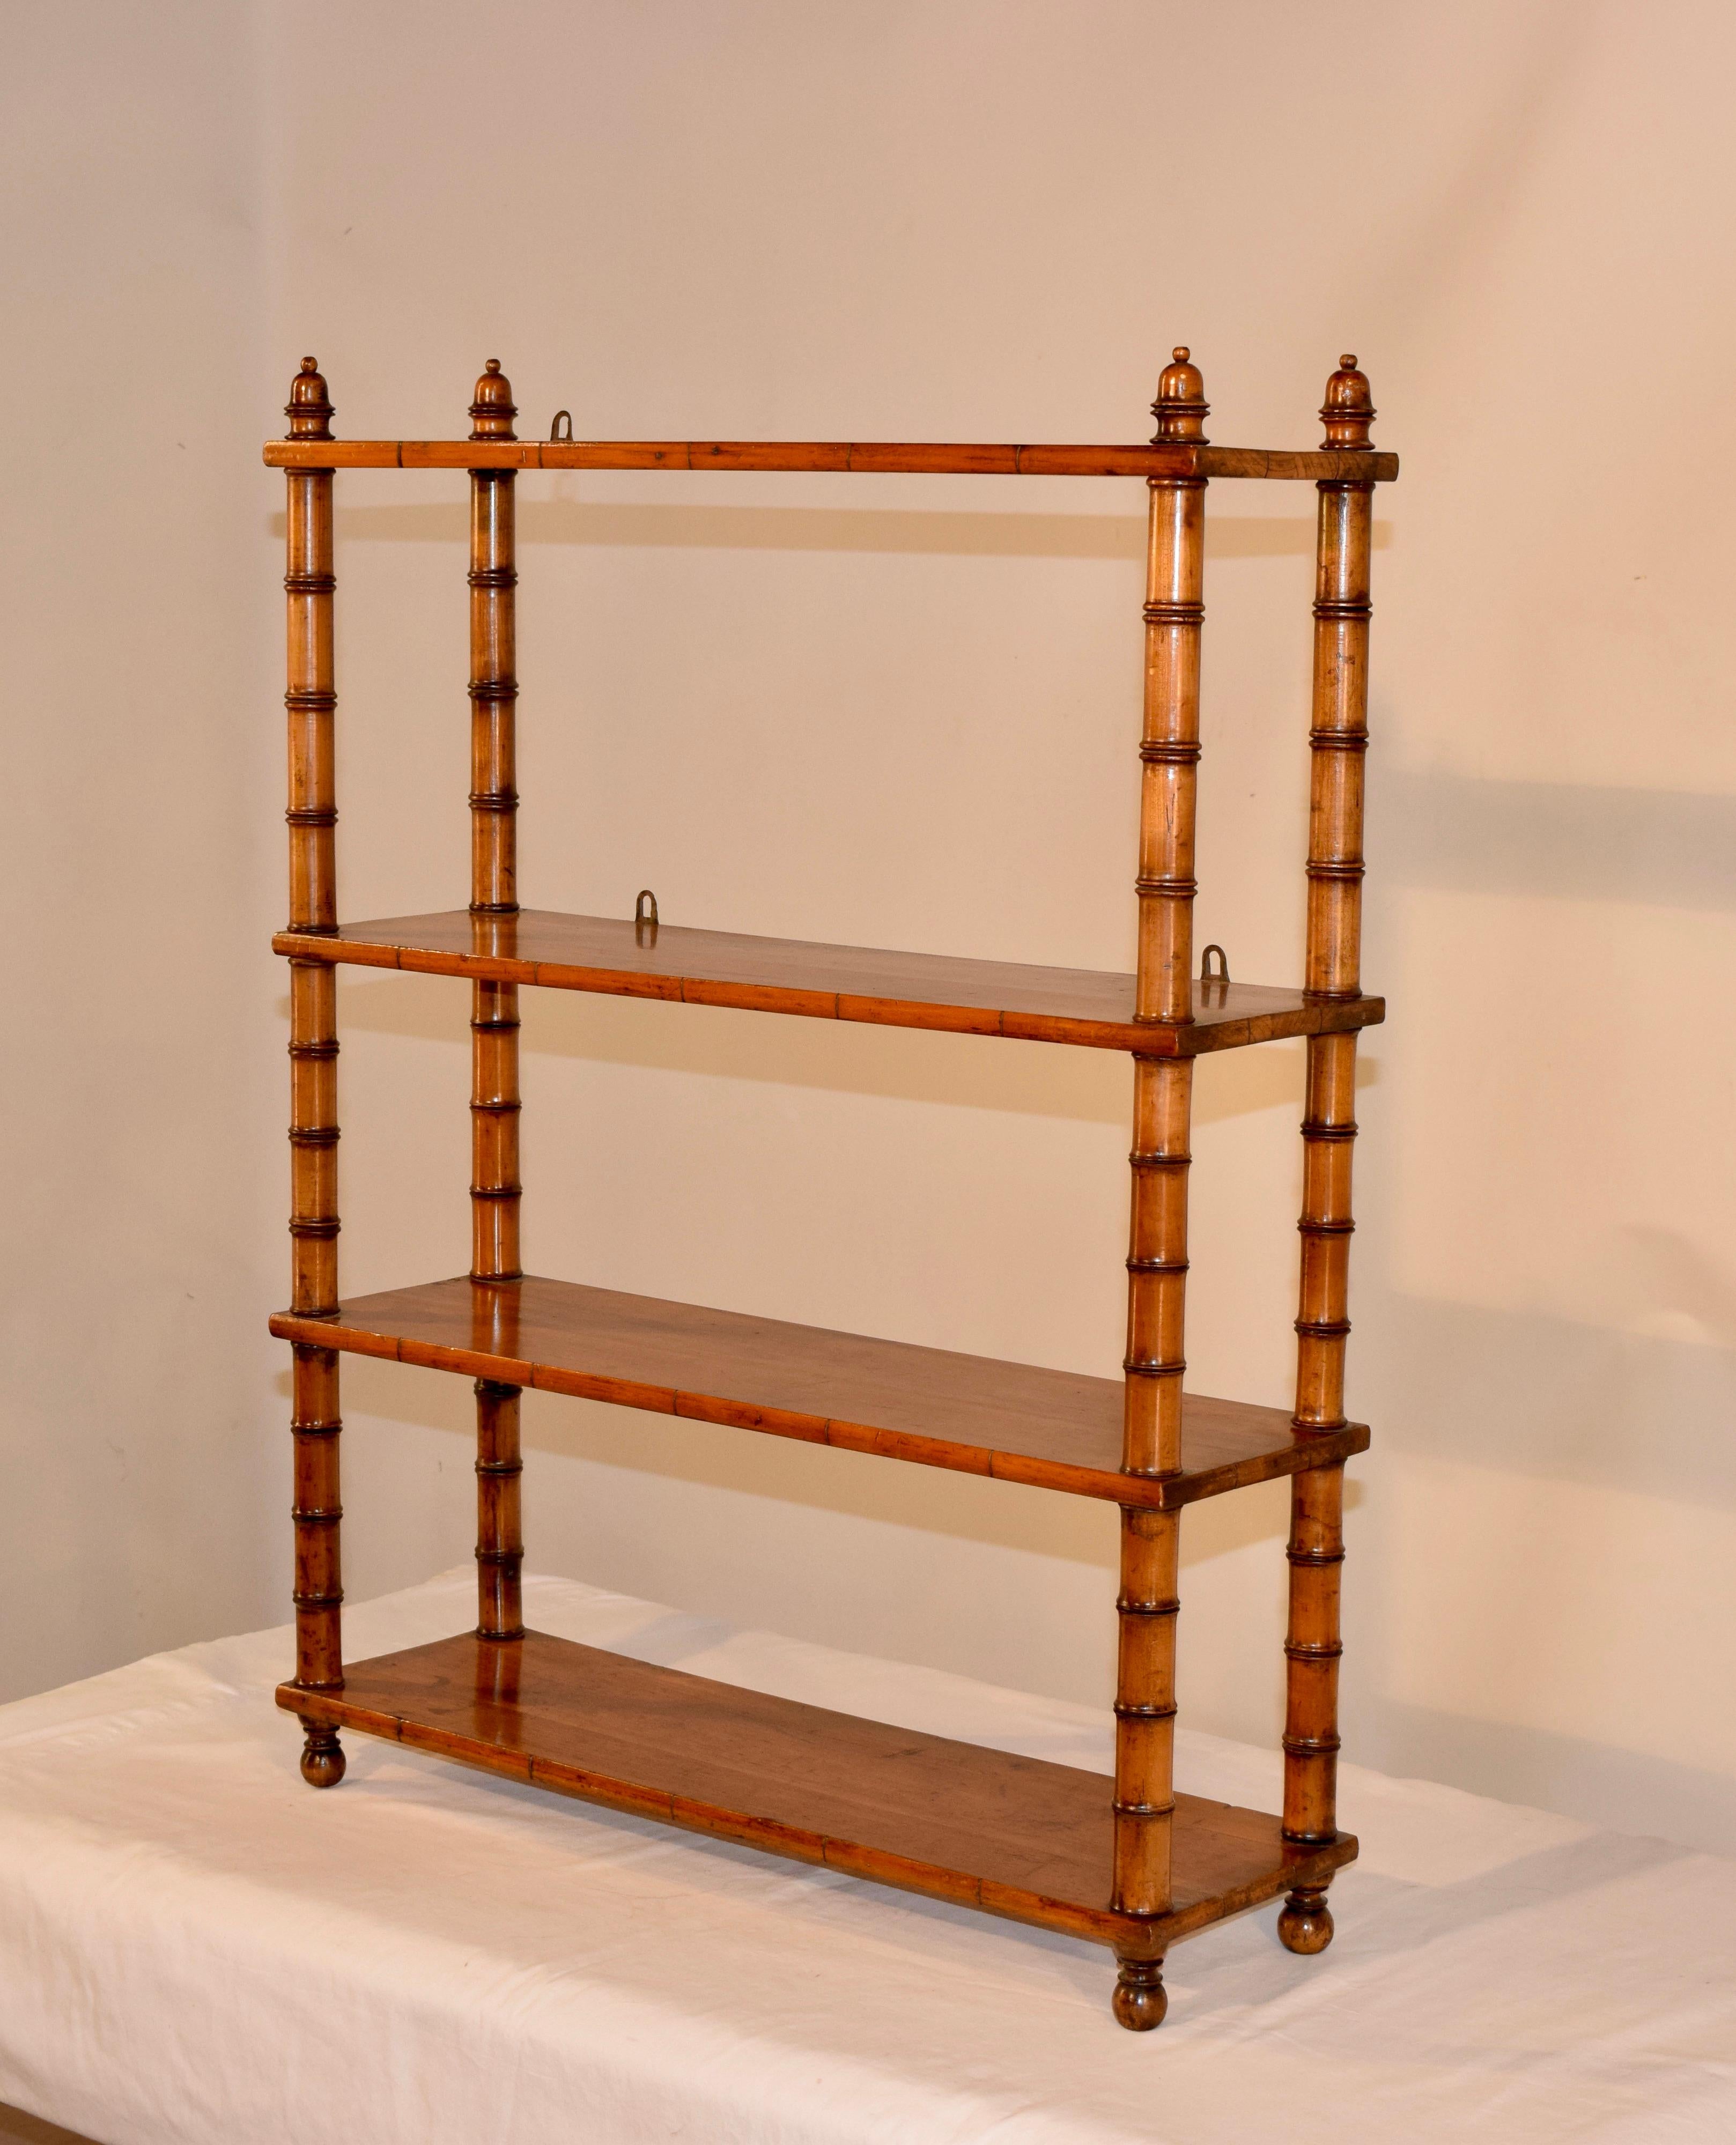 19th century cherry wall shelf from France with hand-turned finials and shelf supports and four shelves. Supported on hand-turned feet. Shelf has hanging hardware but can be used as a standing shelf if desired.